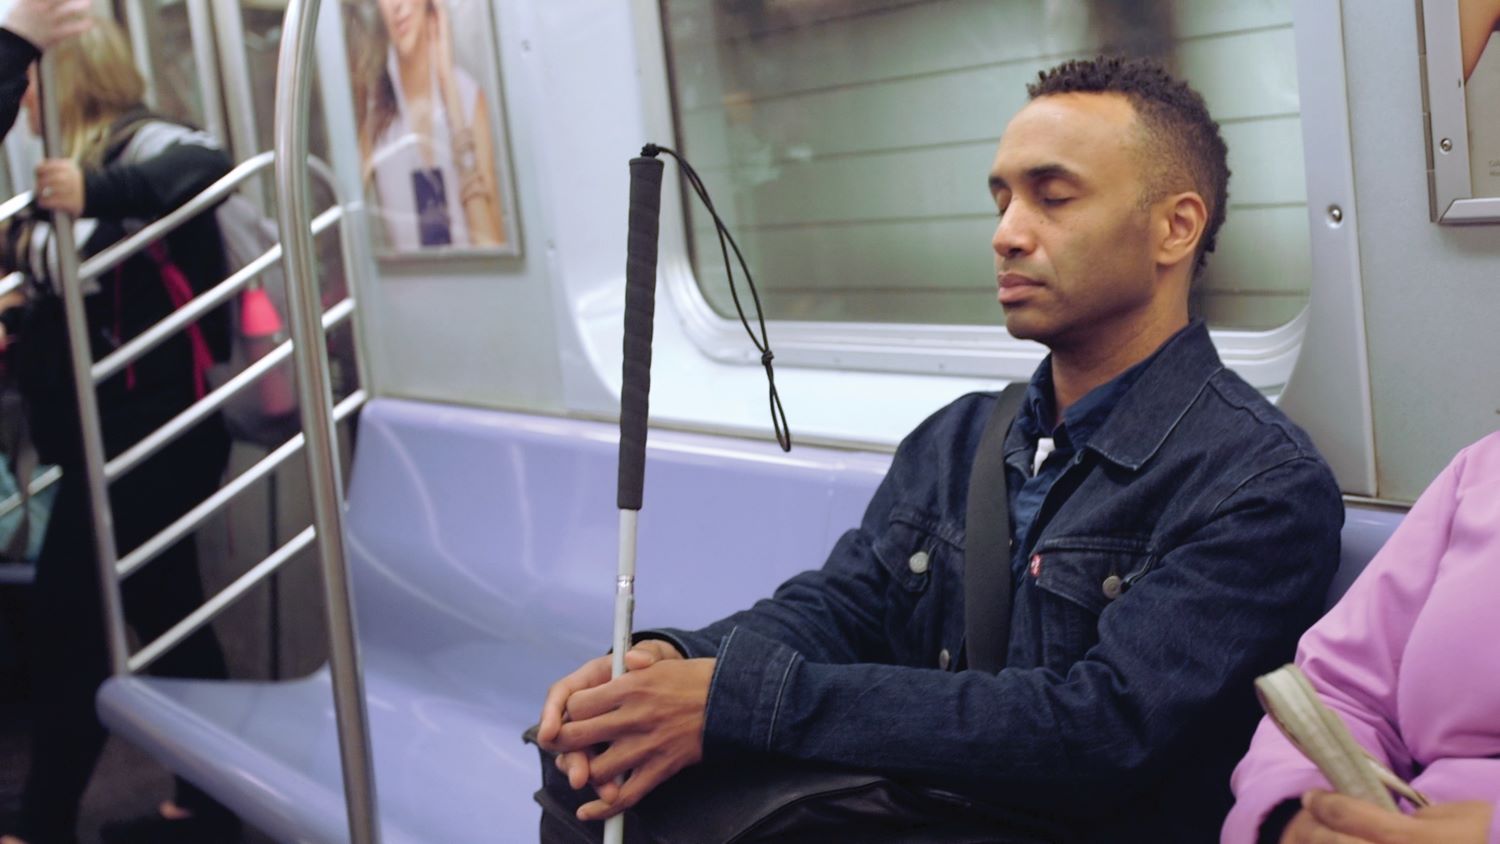 A man sits in a subway train with his eyes closed